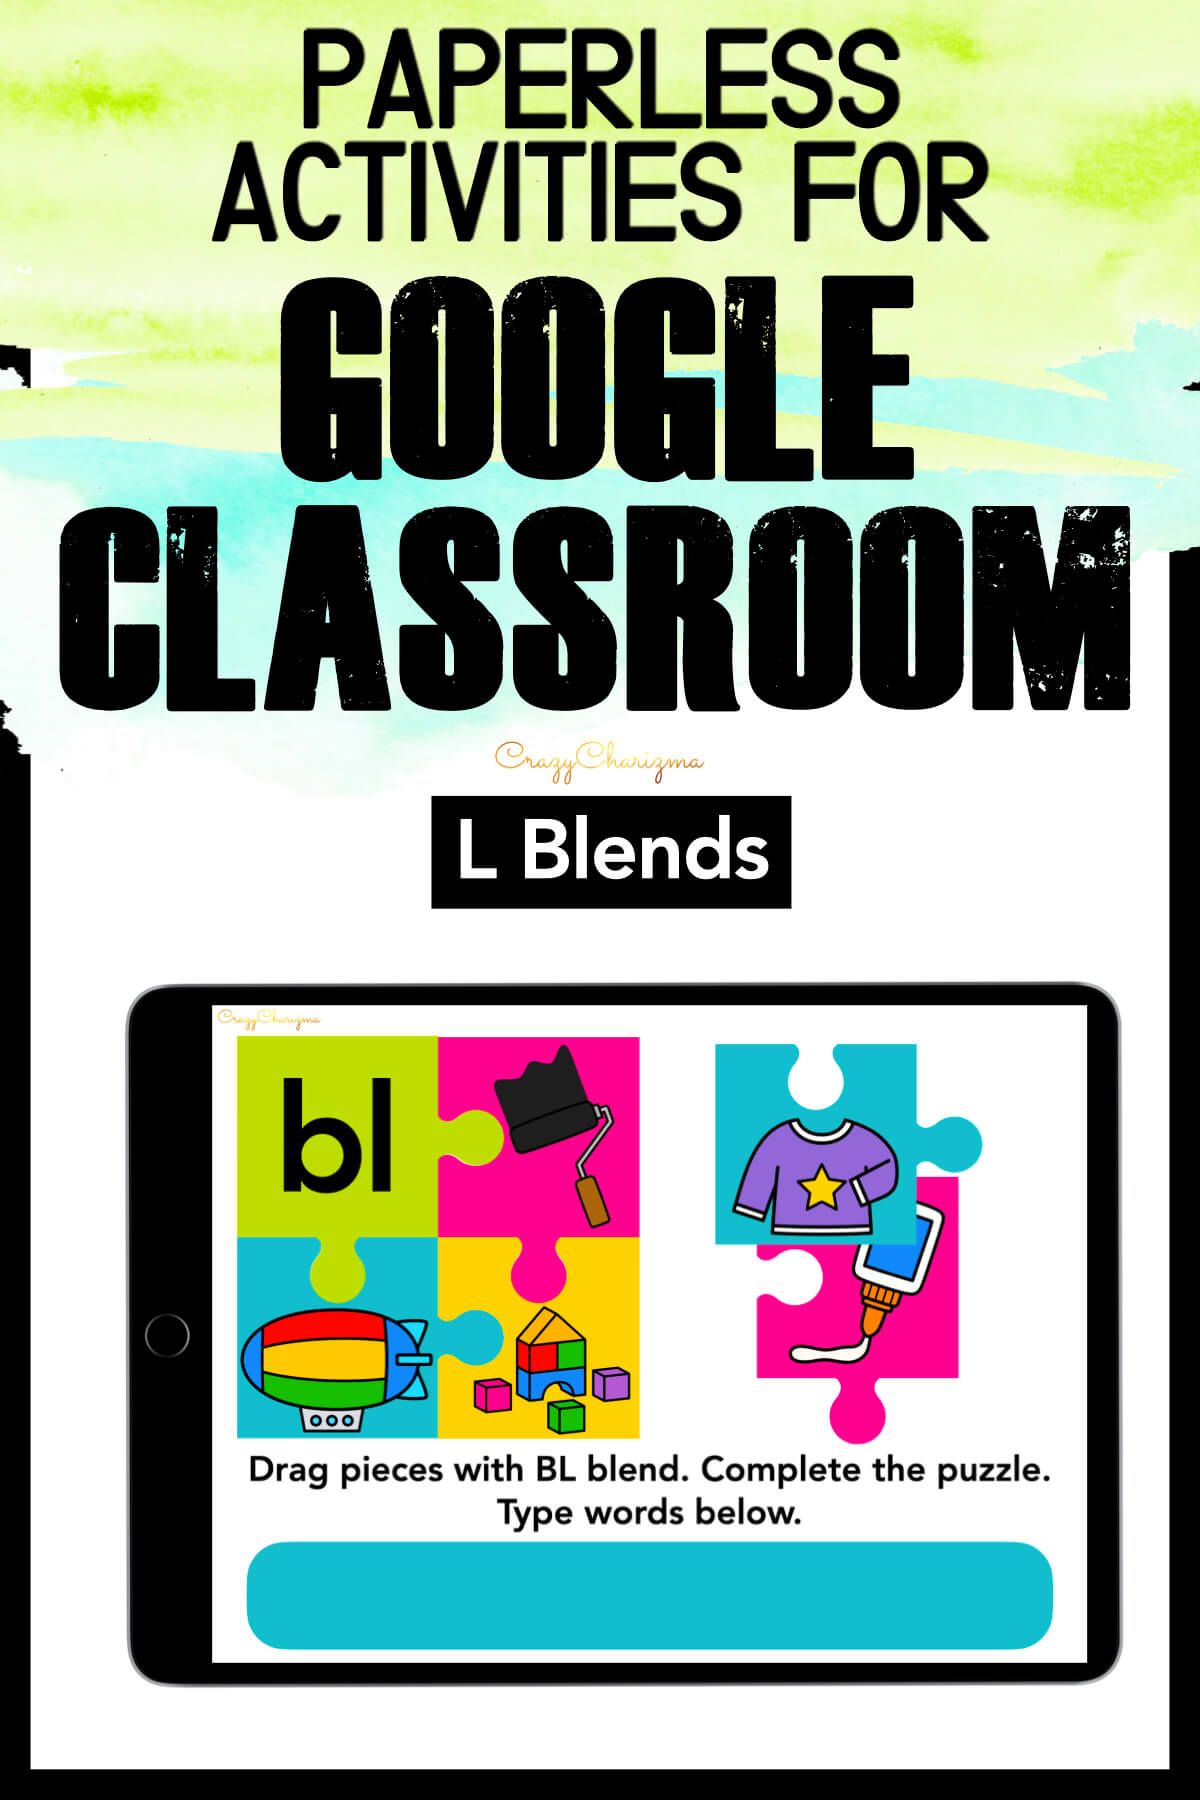 Need to practice beginning L BLENDS in a fun way? Check out these interactive puzzles for Google Classroom. Kids will match pieces of puzzles (images to the blend) and type the words.